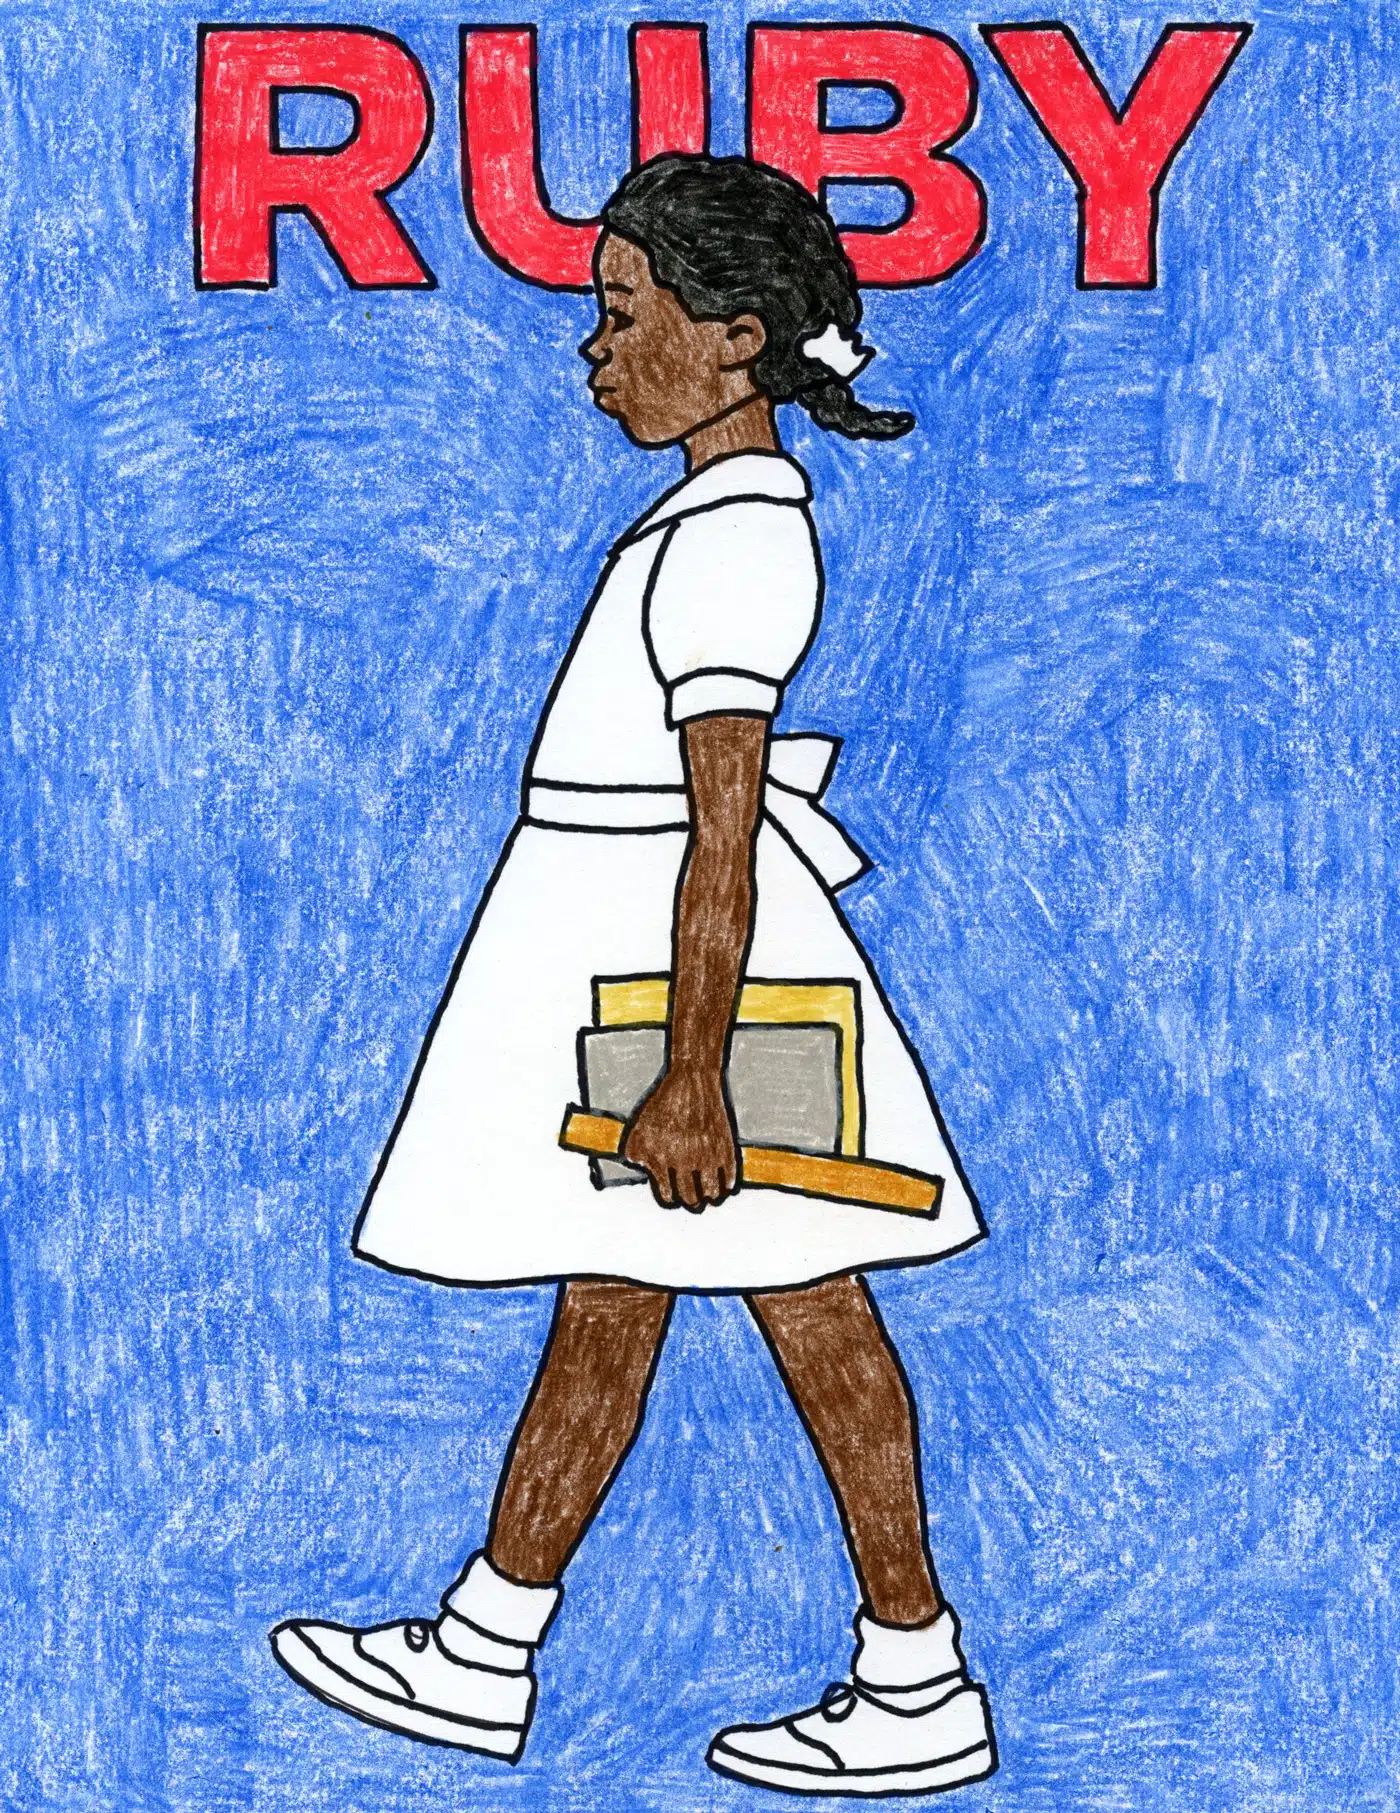 Easy How to Draw Ruby Bridges Tutorial and Ruby Bridges Coloring Page